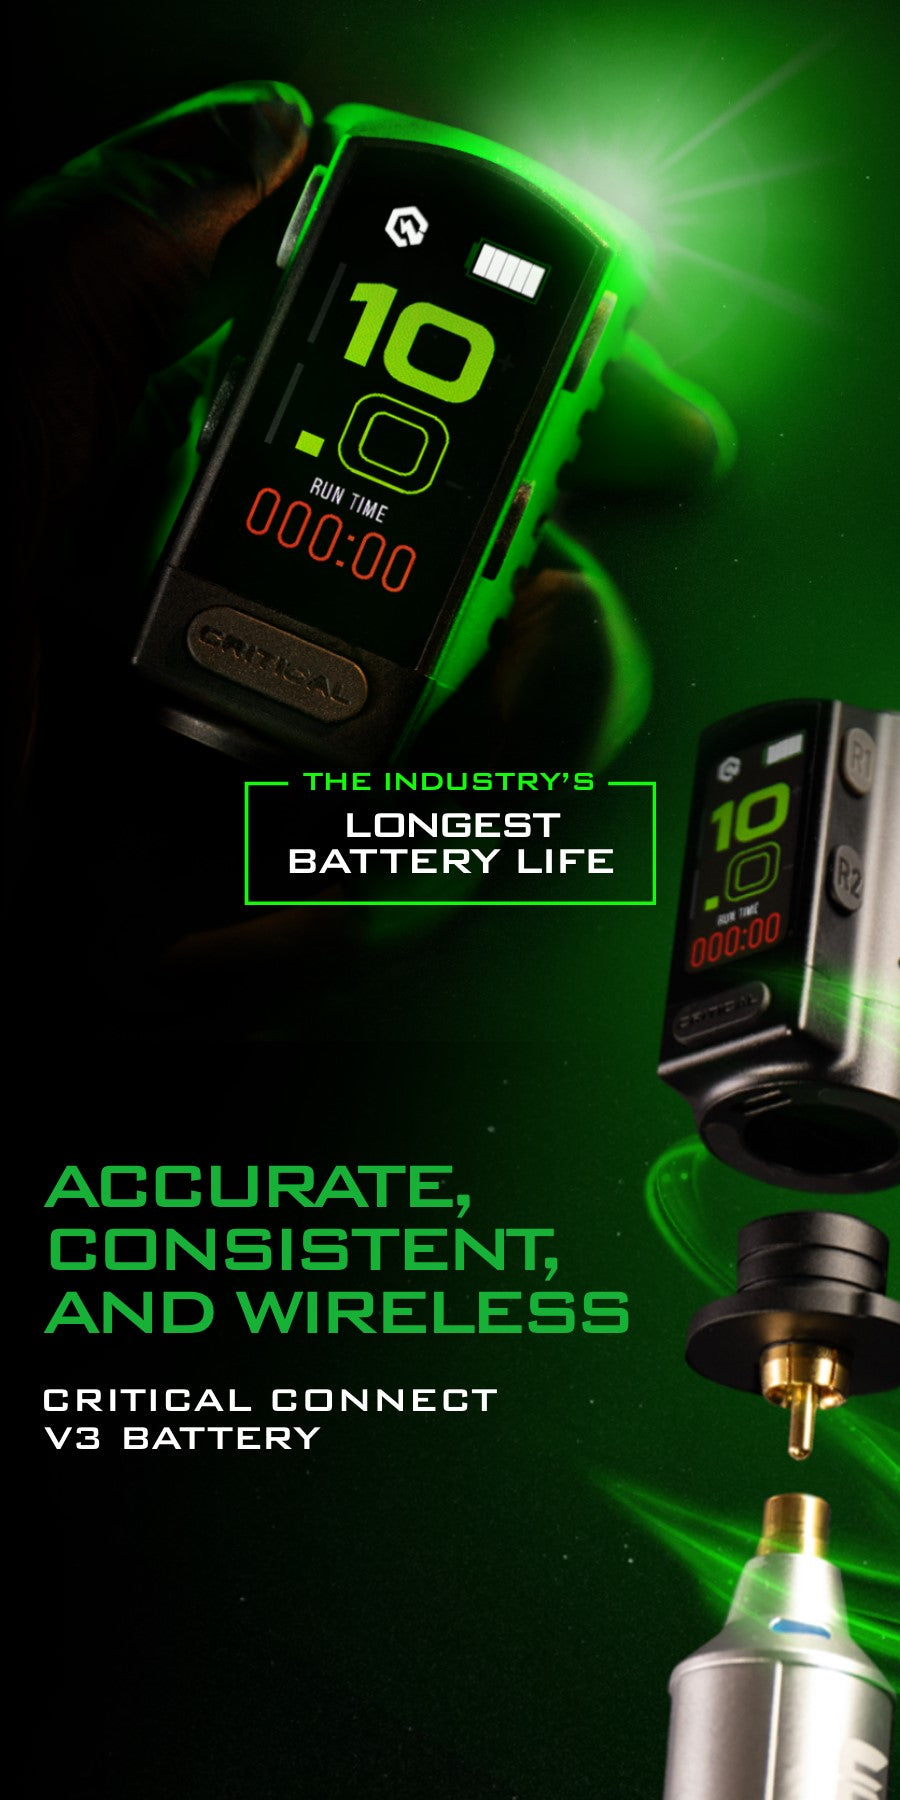 Critical Connect V3 Battery Now Available!